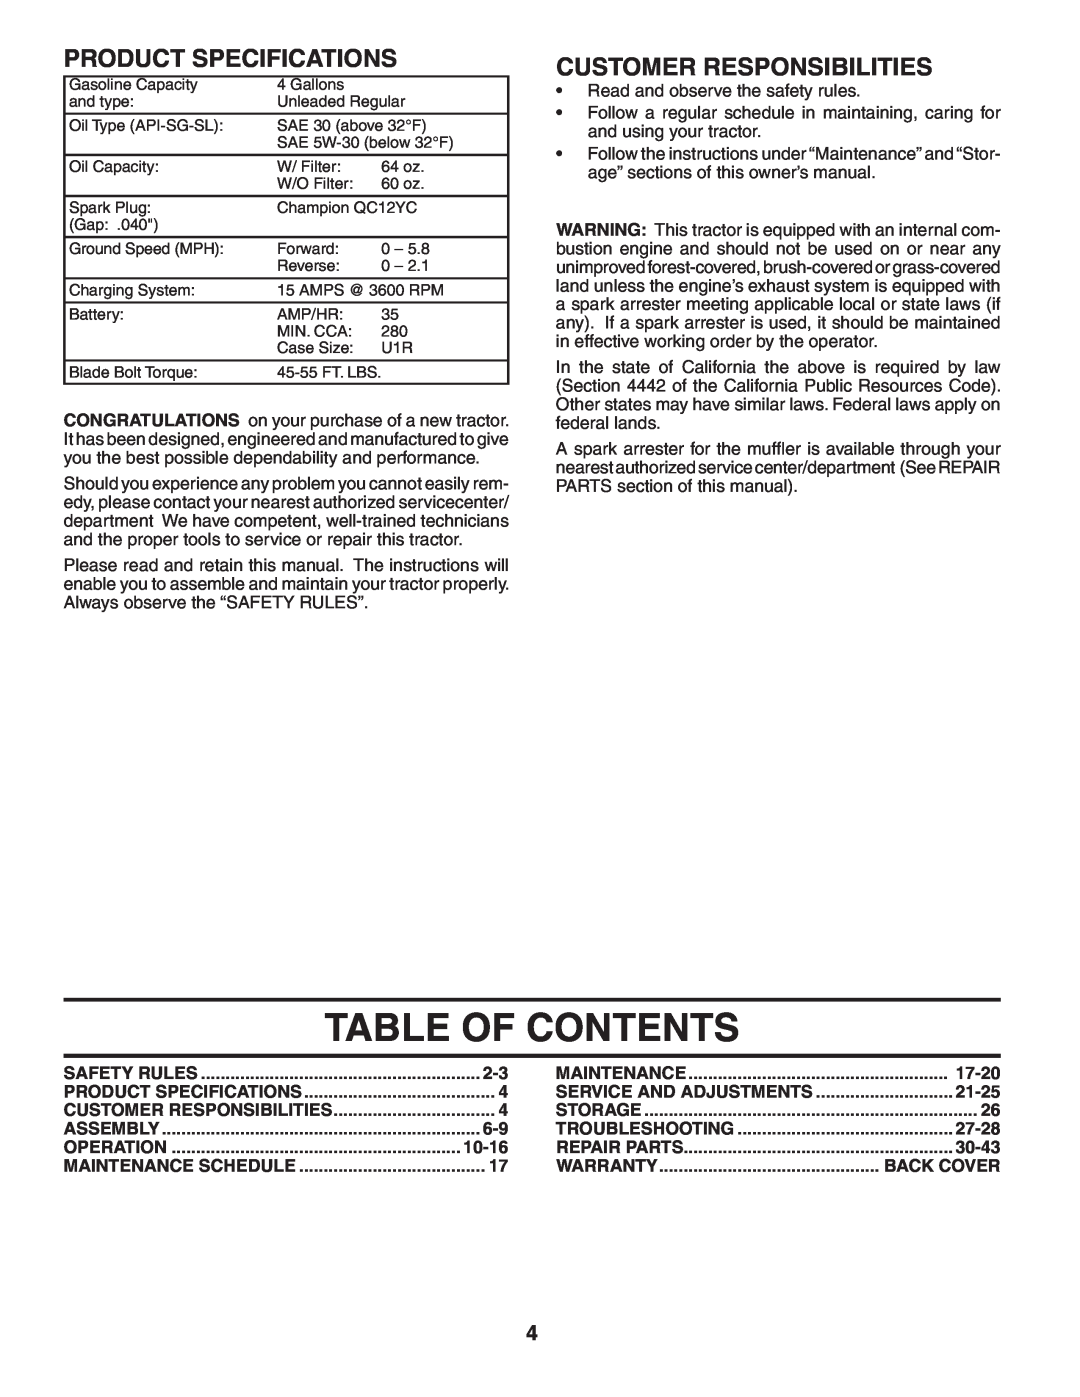 Husqvarna GTH26K54 owner manual Table Of Contents, Product Specifications, Customer Responsibilities 